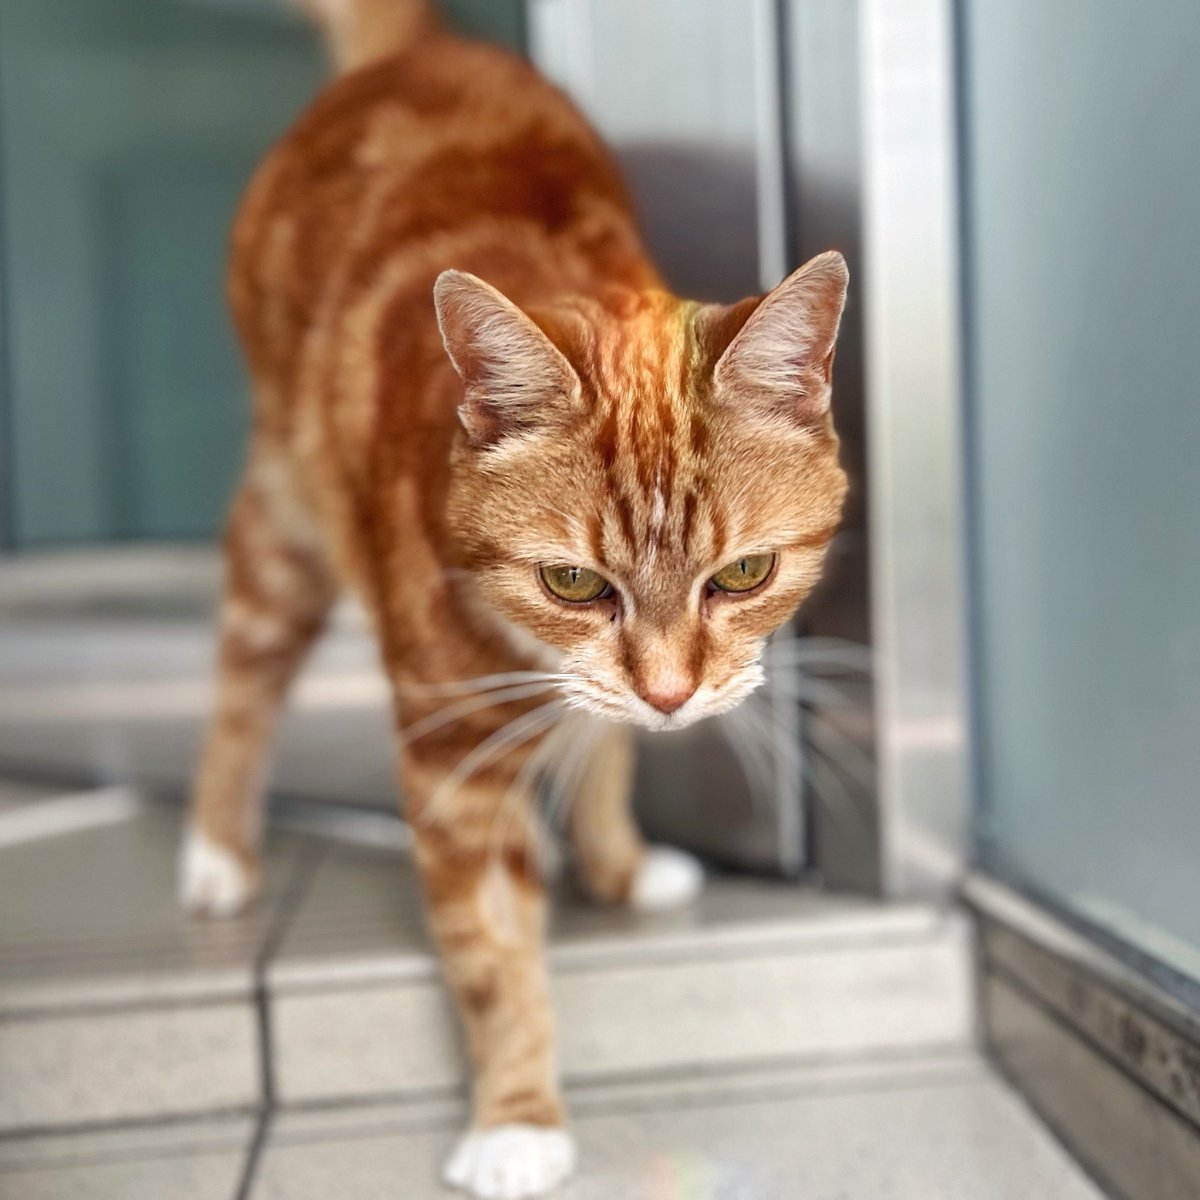 Cats like to feel in control of their environment as possible. Giving your cat the option to use a cat flap and come and go as they please is likely to help them feel happier and more relaxed. 😺💙 Read more advice on cat flaps 👉 bit.ly/2Q6NcvM